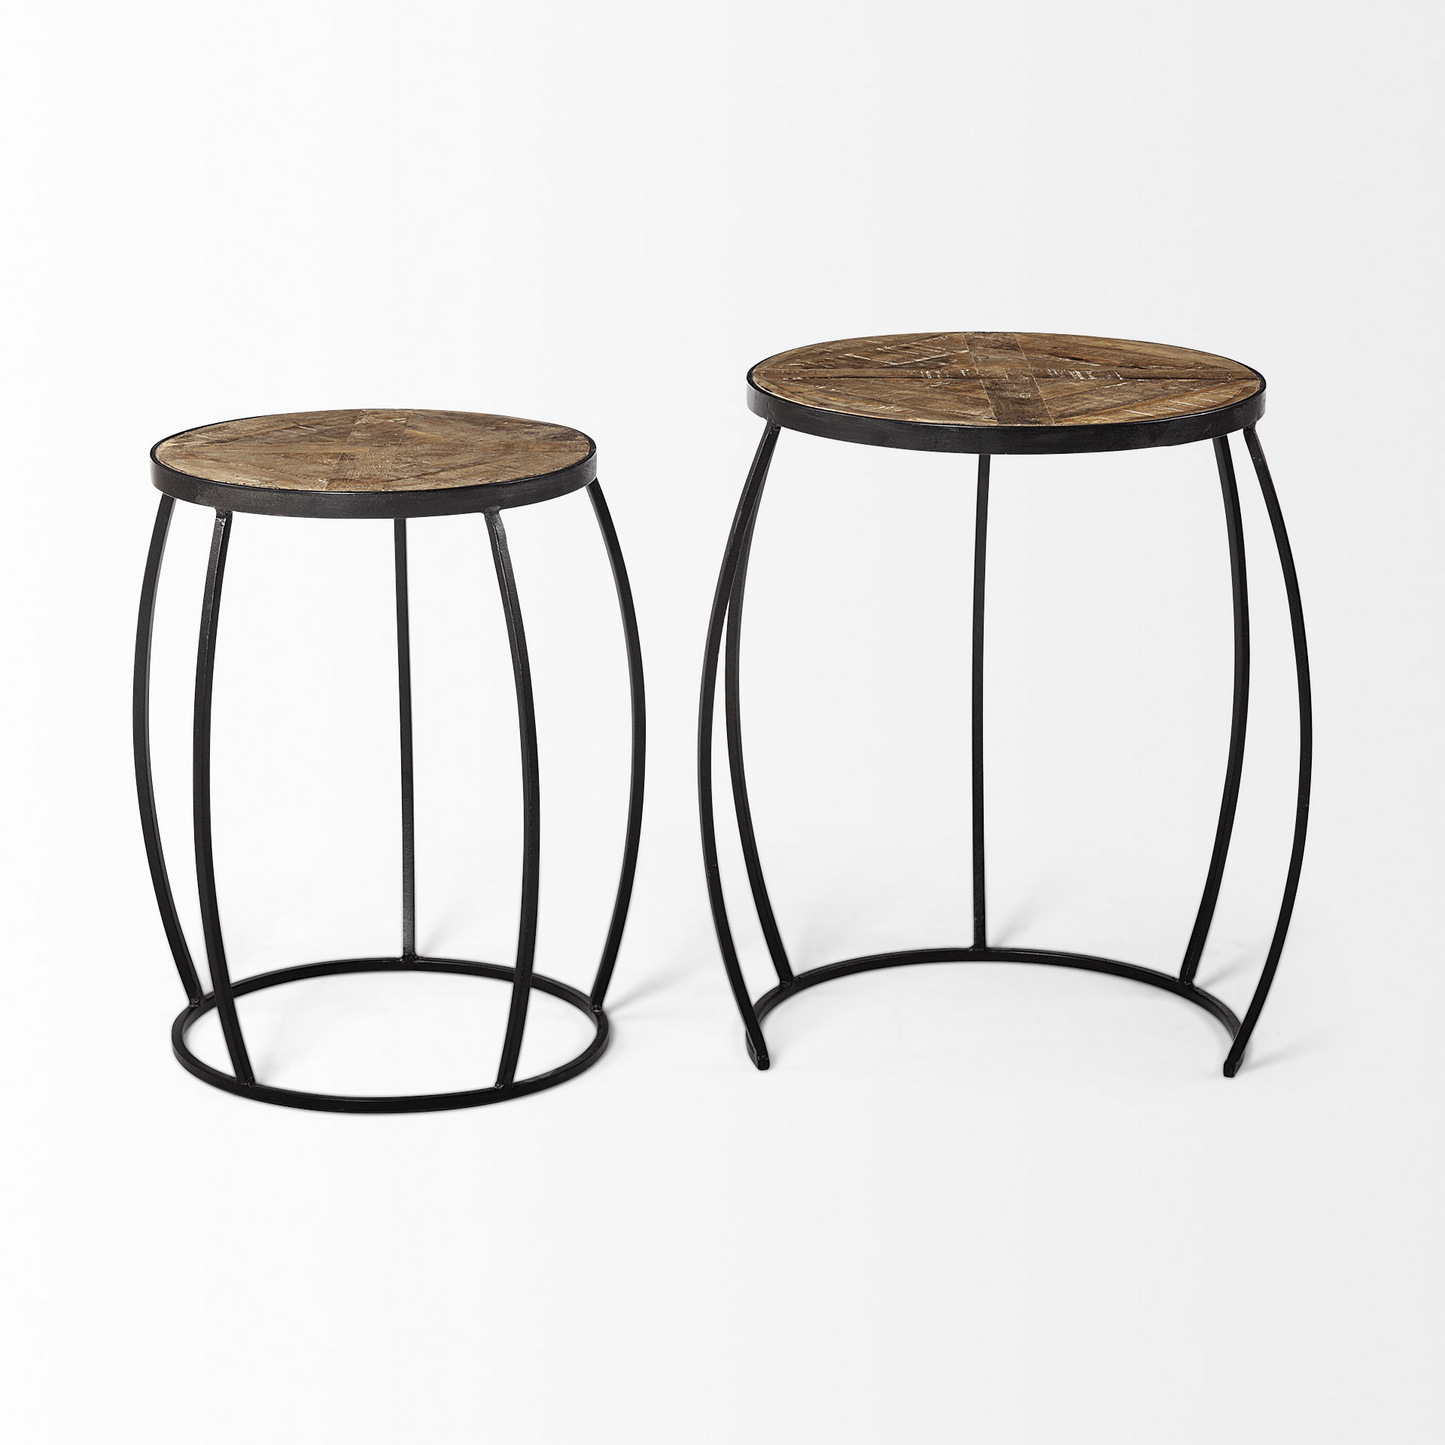 Round Wooden Top Accent Tables w/Black Metal Frame Nesting Tables (Set of 2)